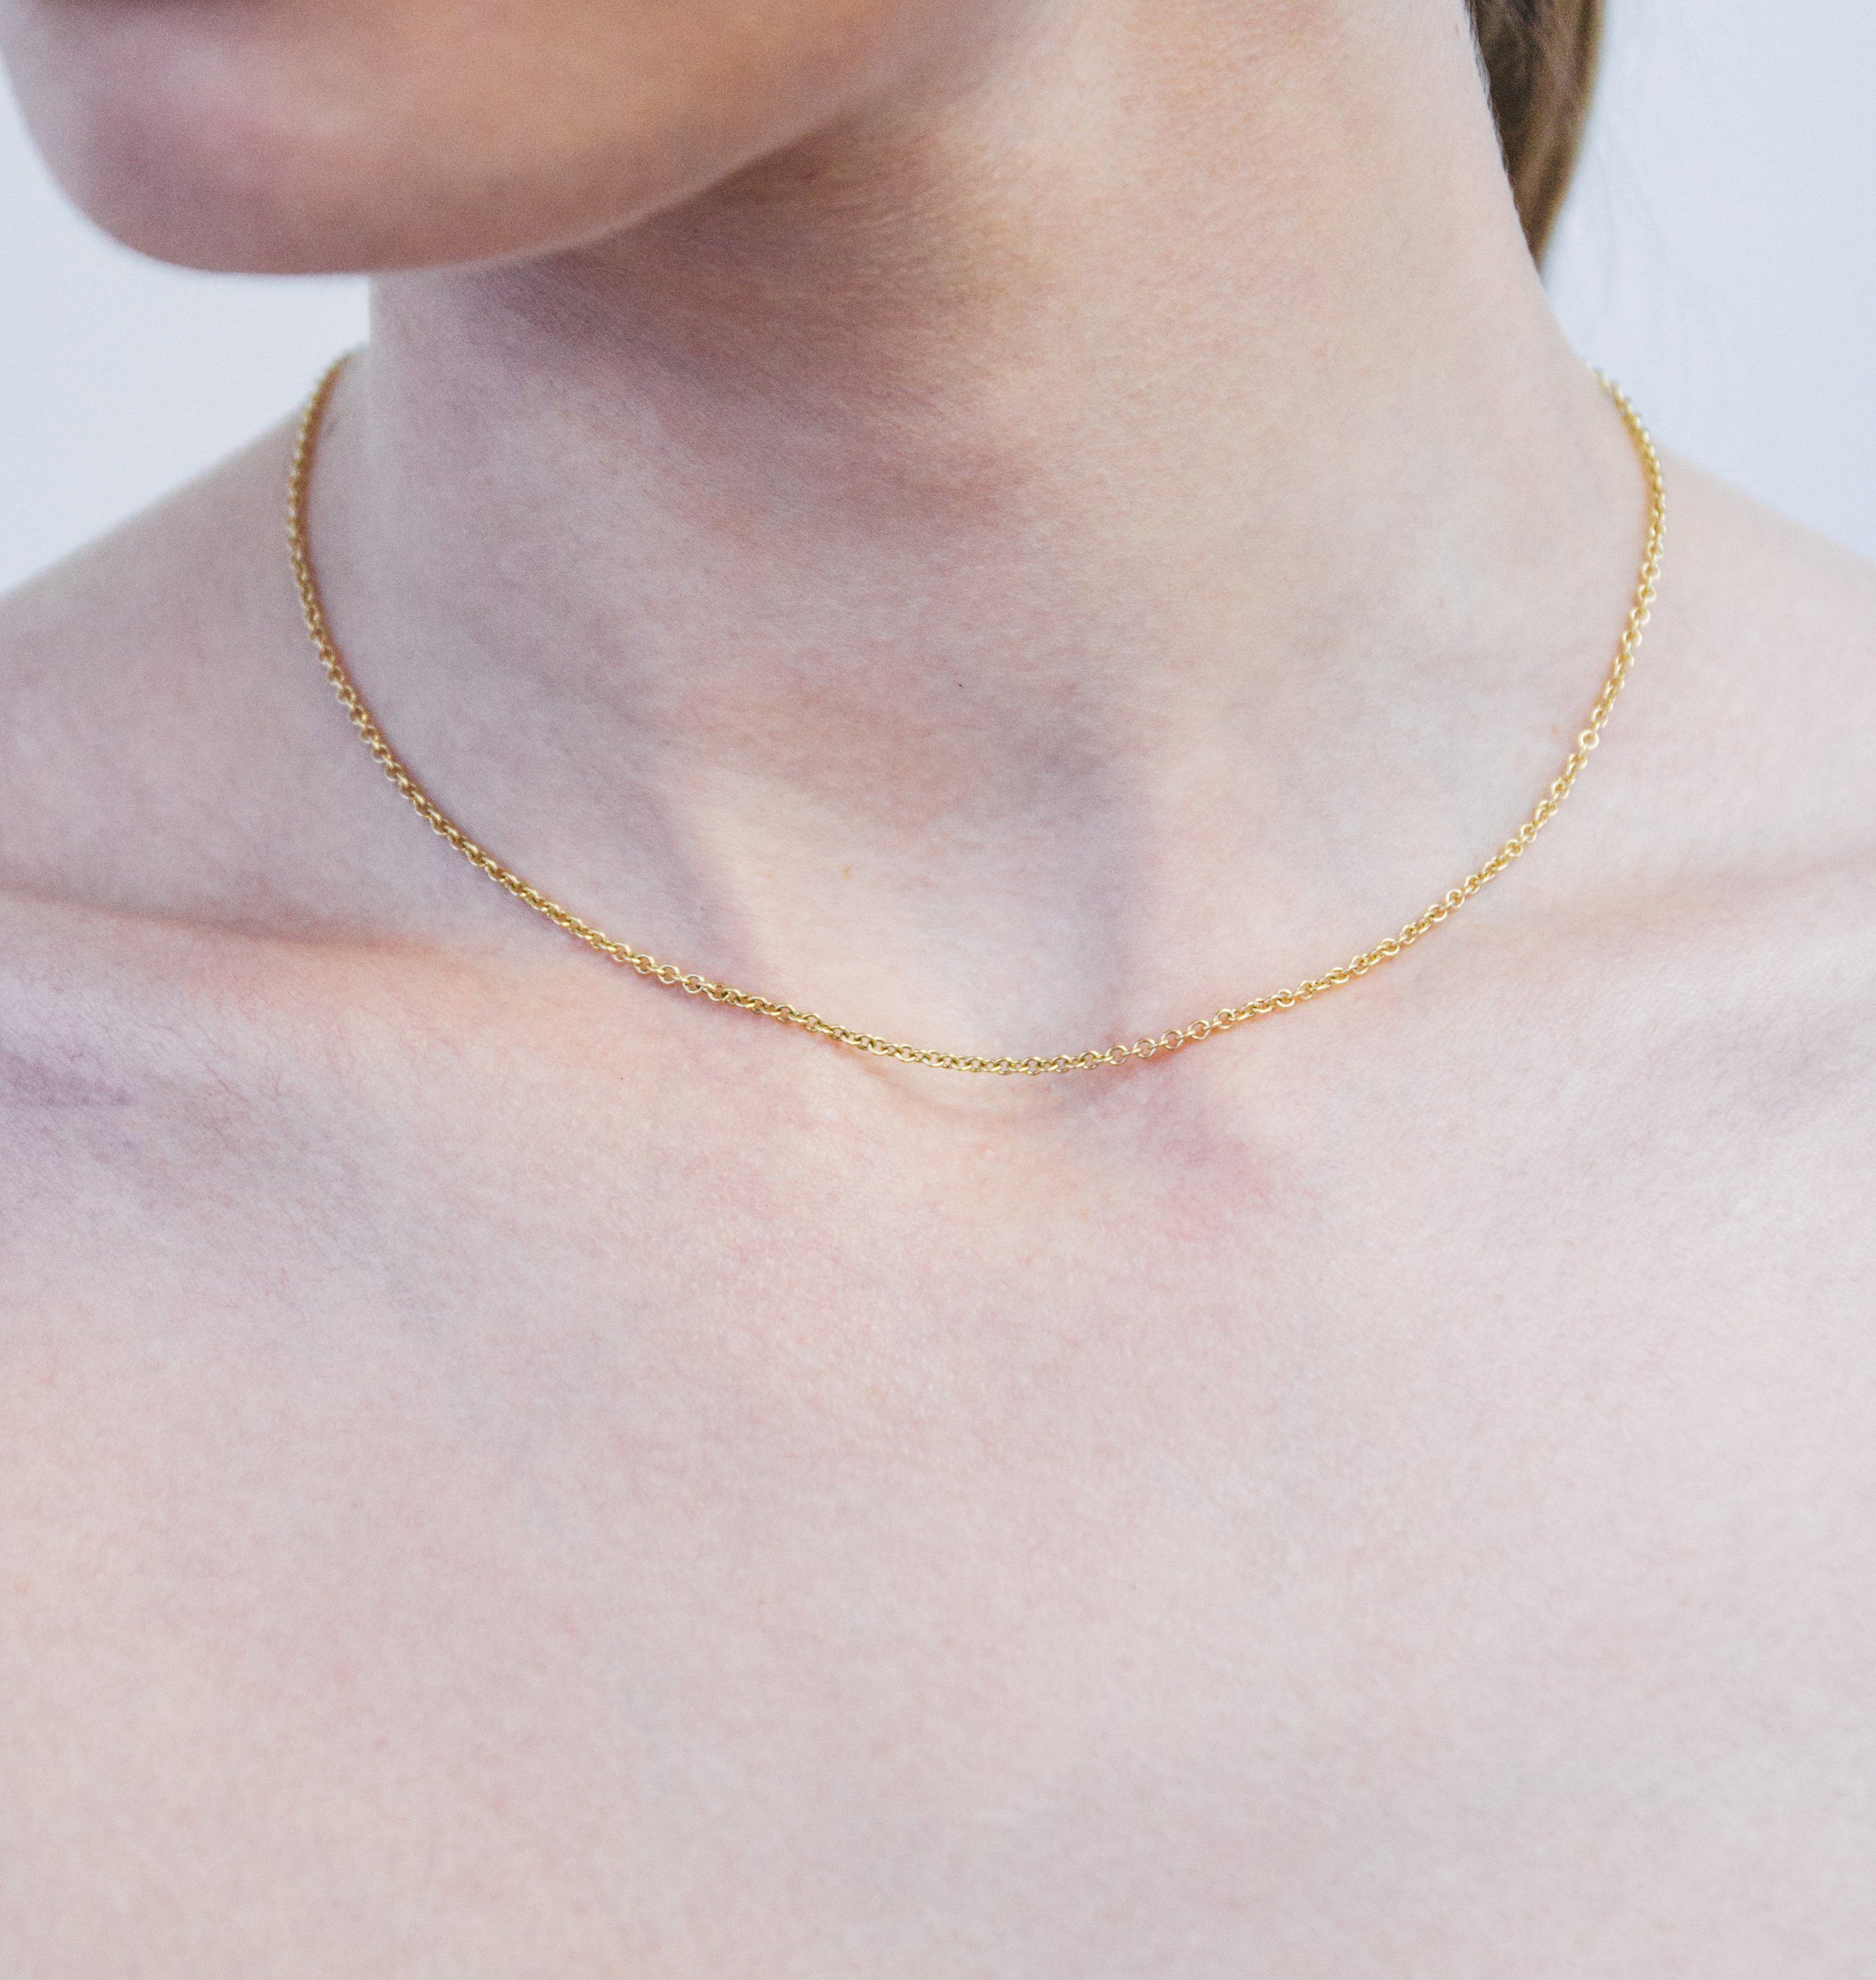 Large Cable Chain | Gold Chain | Pendant Chain | Necklace Chain 14K White Gold / 18in by Helen Ficalora